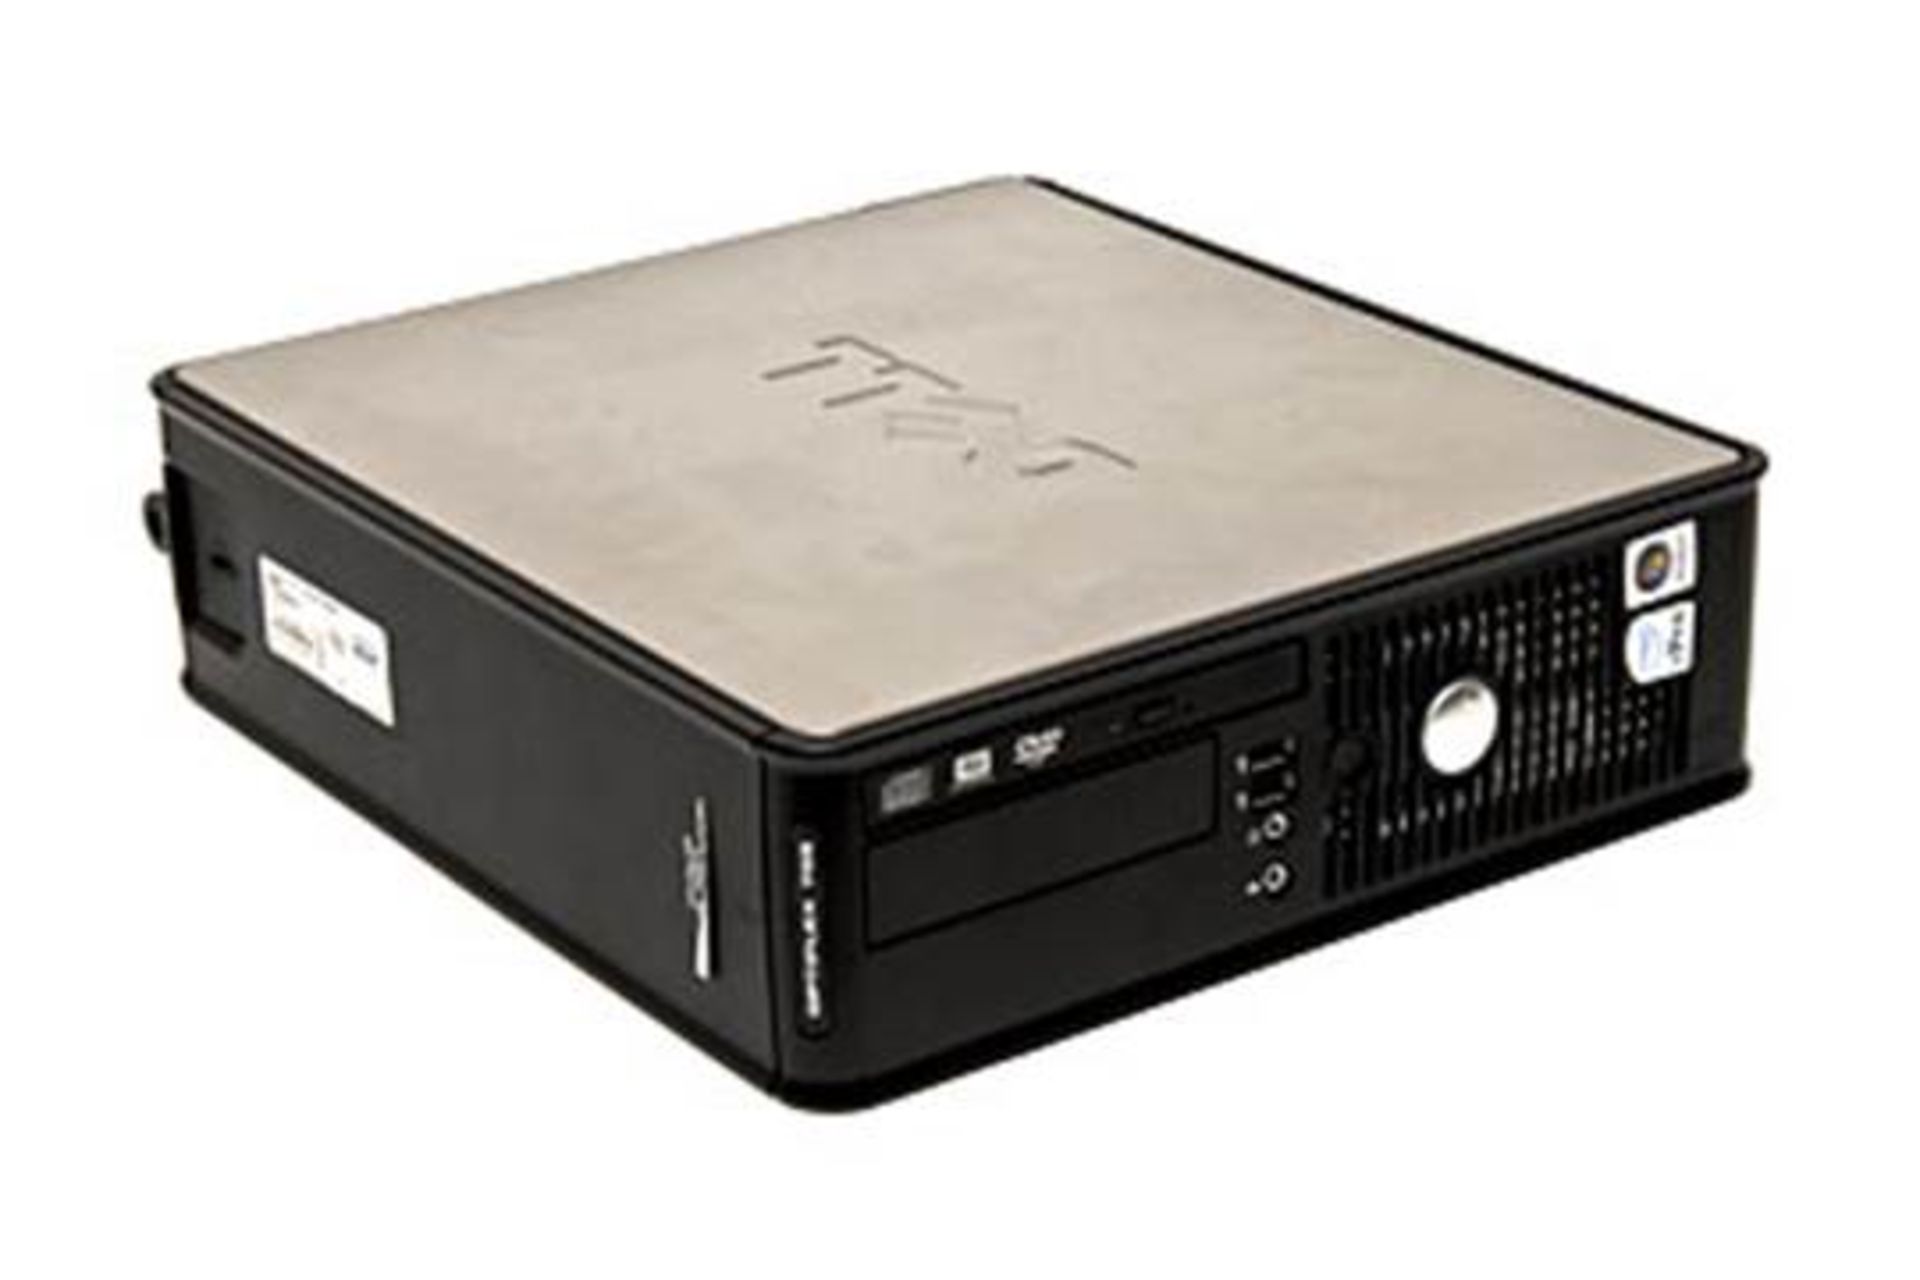 Dell Optiplex 755 Pentium Dual 2.2Ghz 2Gb Ram DVD/CD-Rom USFF PC - No HDD - With PSU - Image 3 of 4